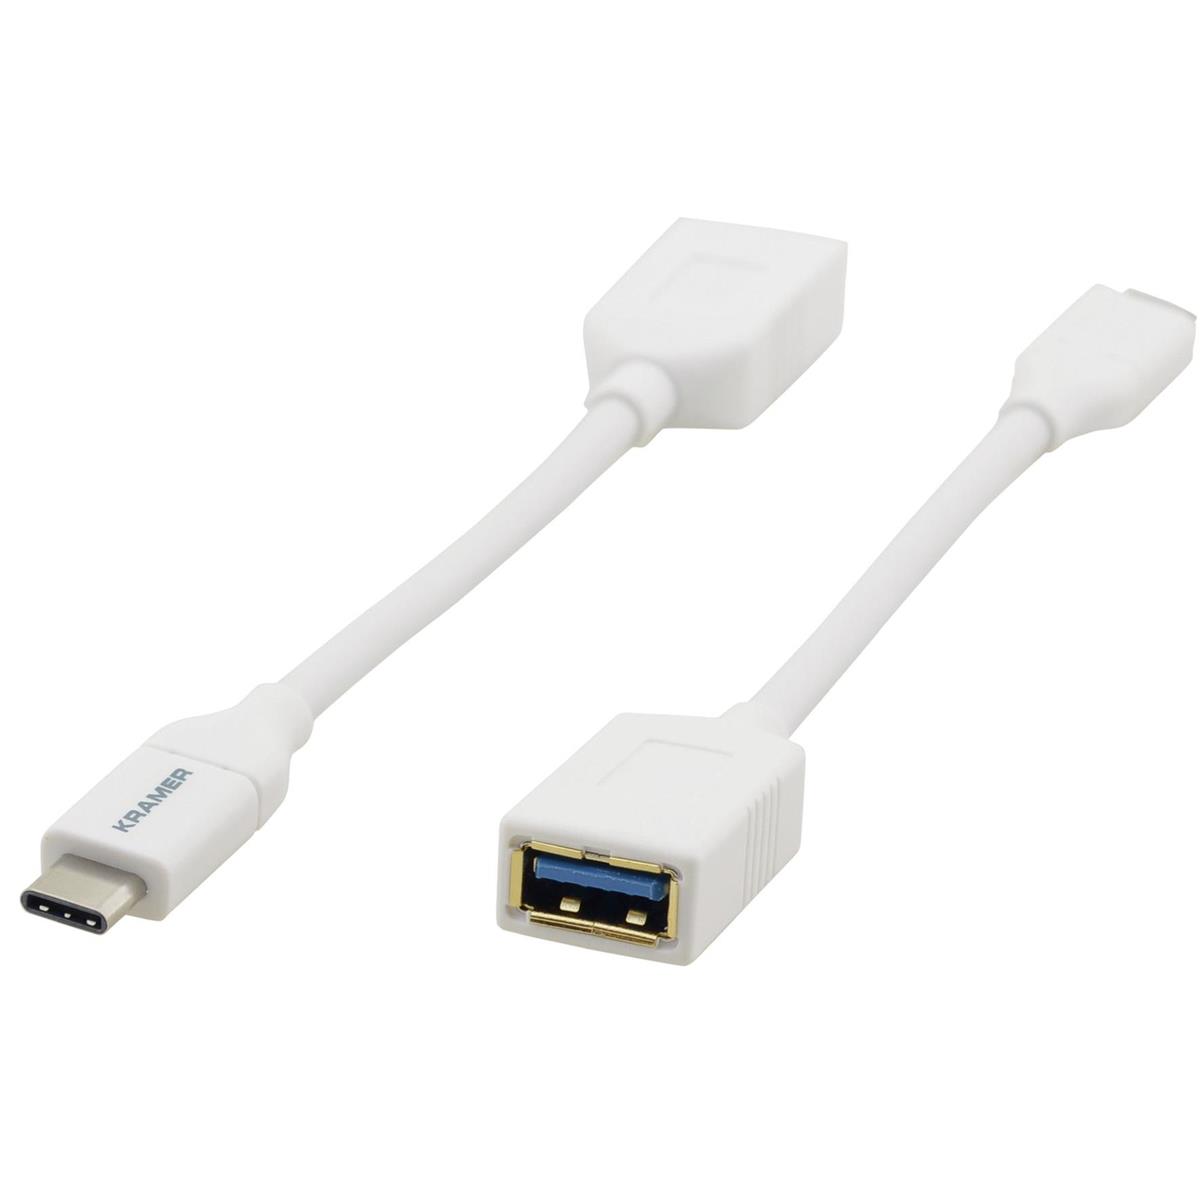 Photos - Other for Computer Kramer Electronics ADC-USB31/CAE USB 3.1 C (M) to USB A (F) Adapter Cable, 